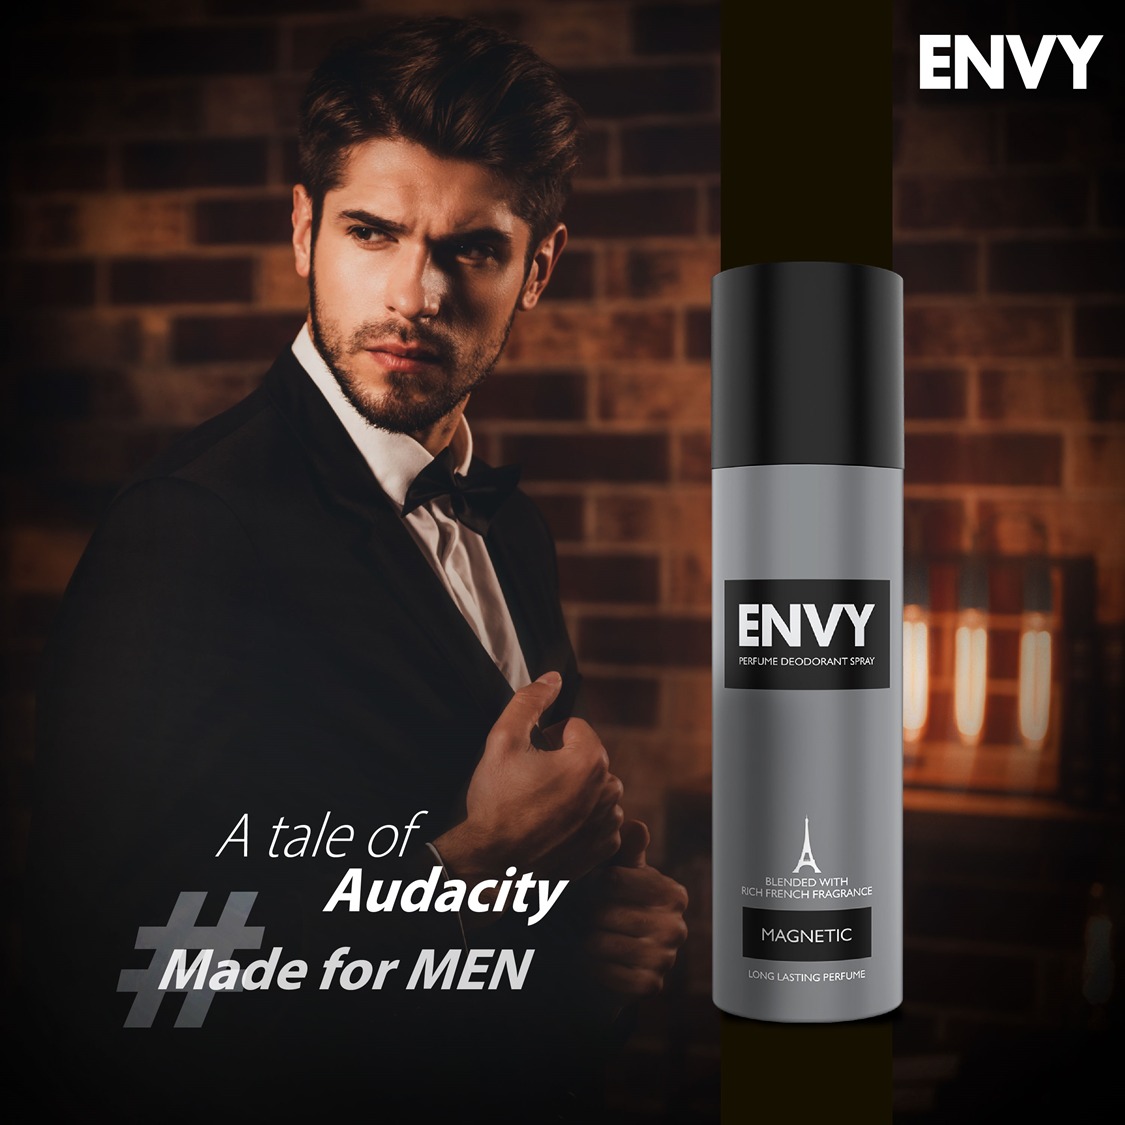 A fragrance that pays homage to your grace, an aroma that encapsulates the grace of you. . . Get Your Envy: envyfragrances.com . . #madeformen #envyfrench #frenchperfume #perfumes #masculinefragrance #menstyling #fashion #menfragrance #menperfume #frenchcollection